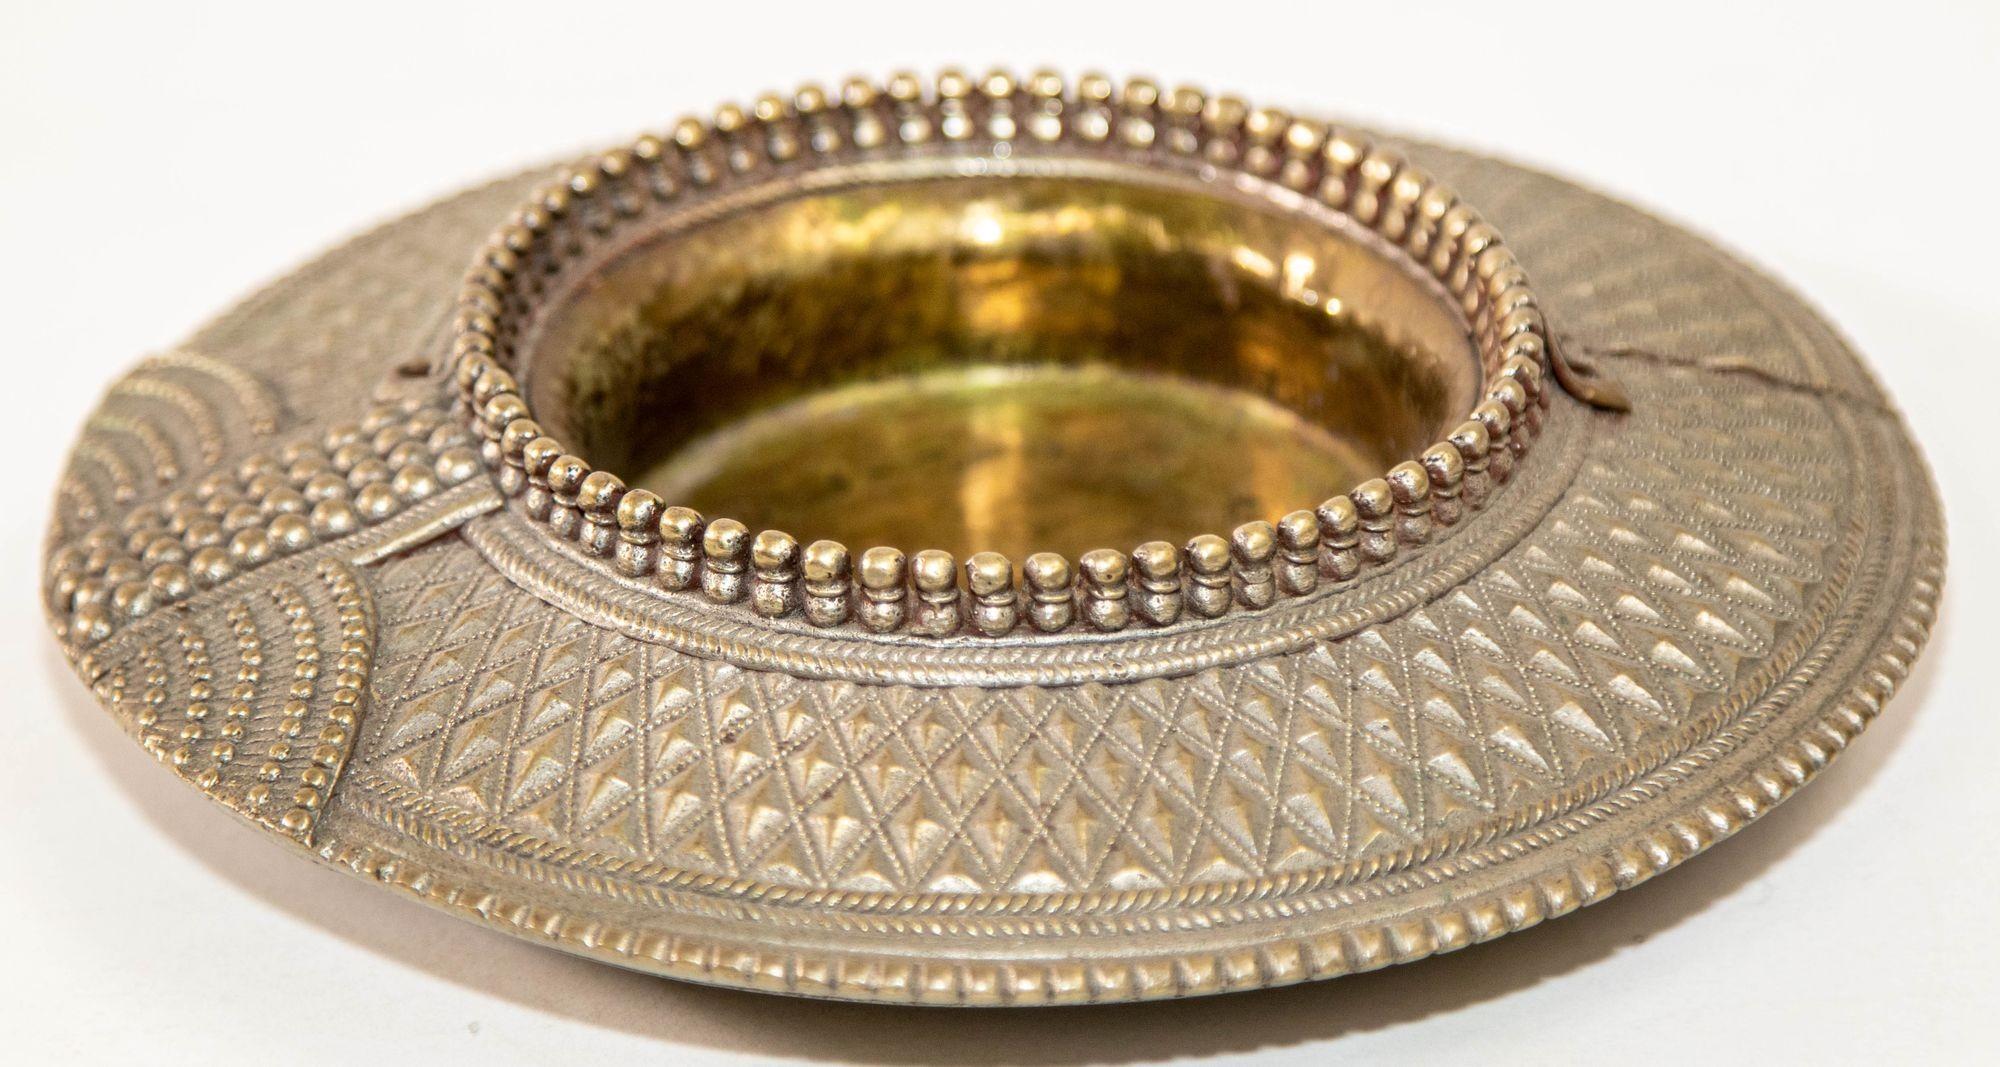 Late 19th century Mughal Indian Raj Style Silvered Traditional Anklet Bracelet from India repurposed as a vide poche, catchall, bowl ashtray or just as a beautiful collectible decorative object from India.
Antique silver coin and brass heavy metal